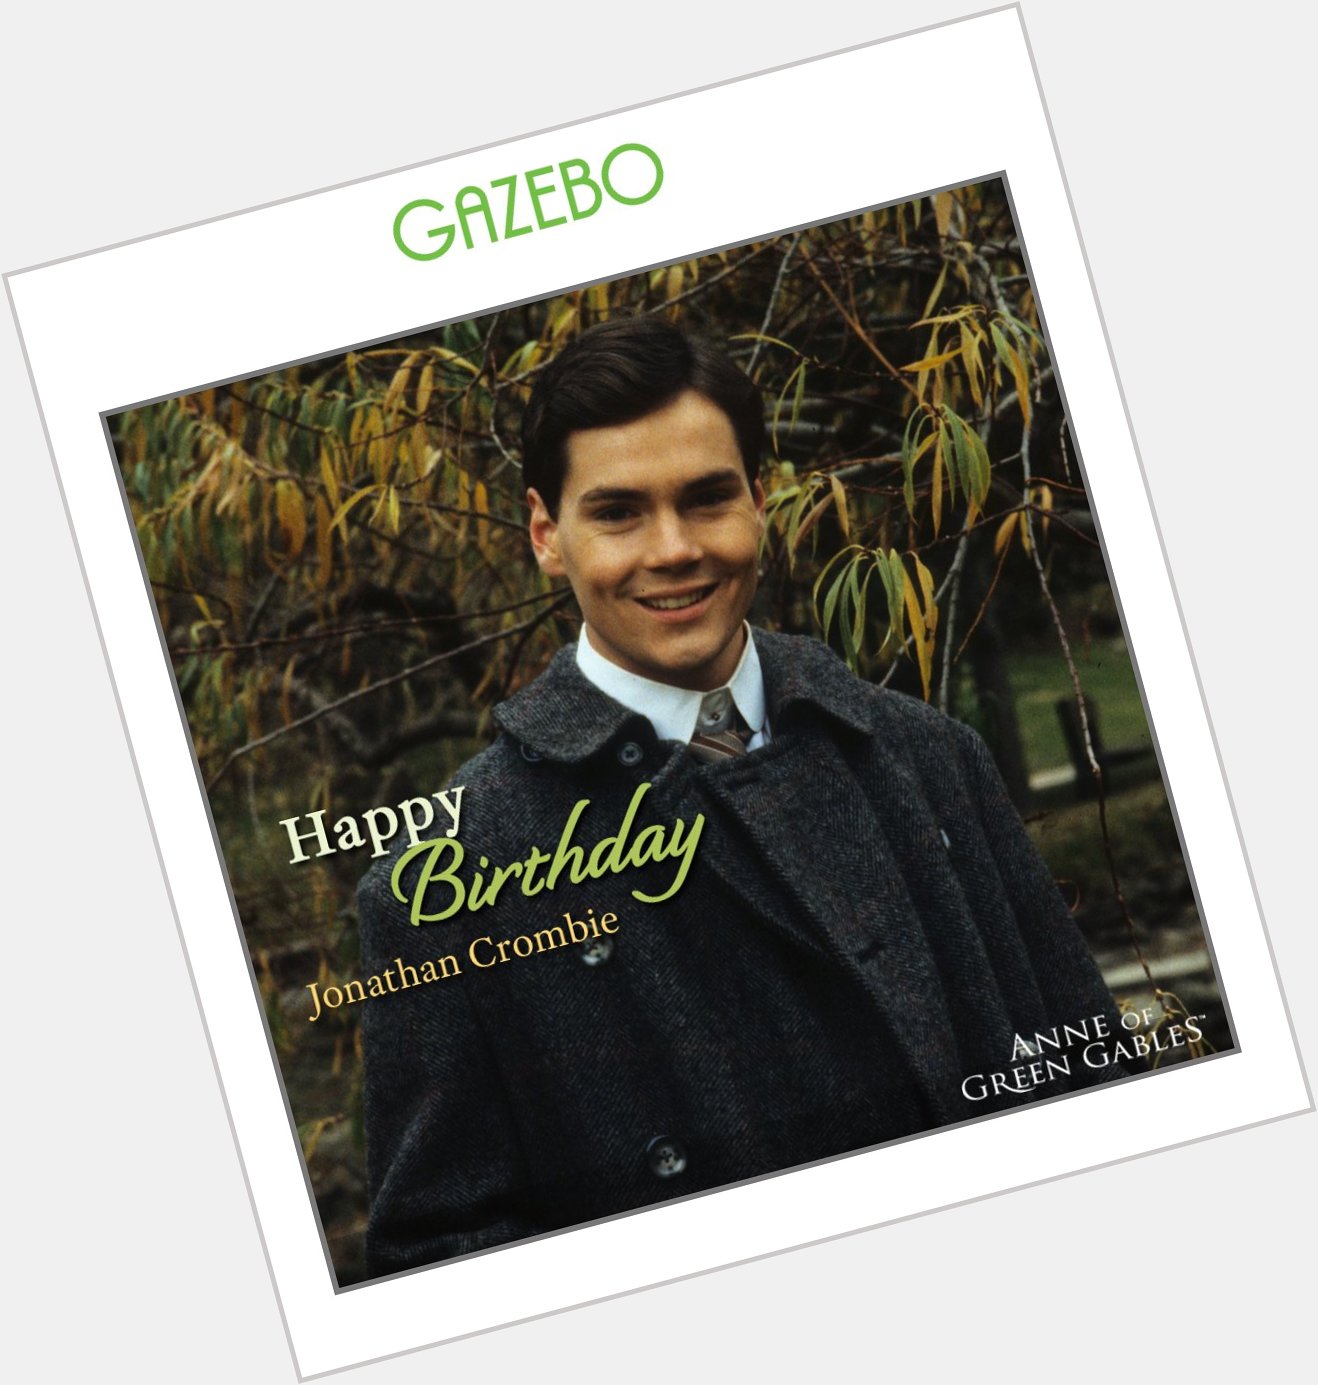 Happy birthday Jonathan Crombie, you will always be the perfect Gil in our hearts! 